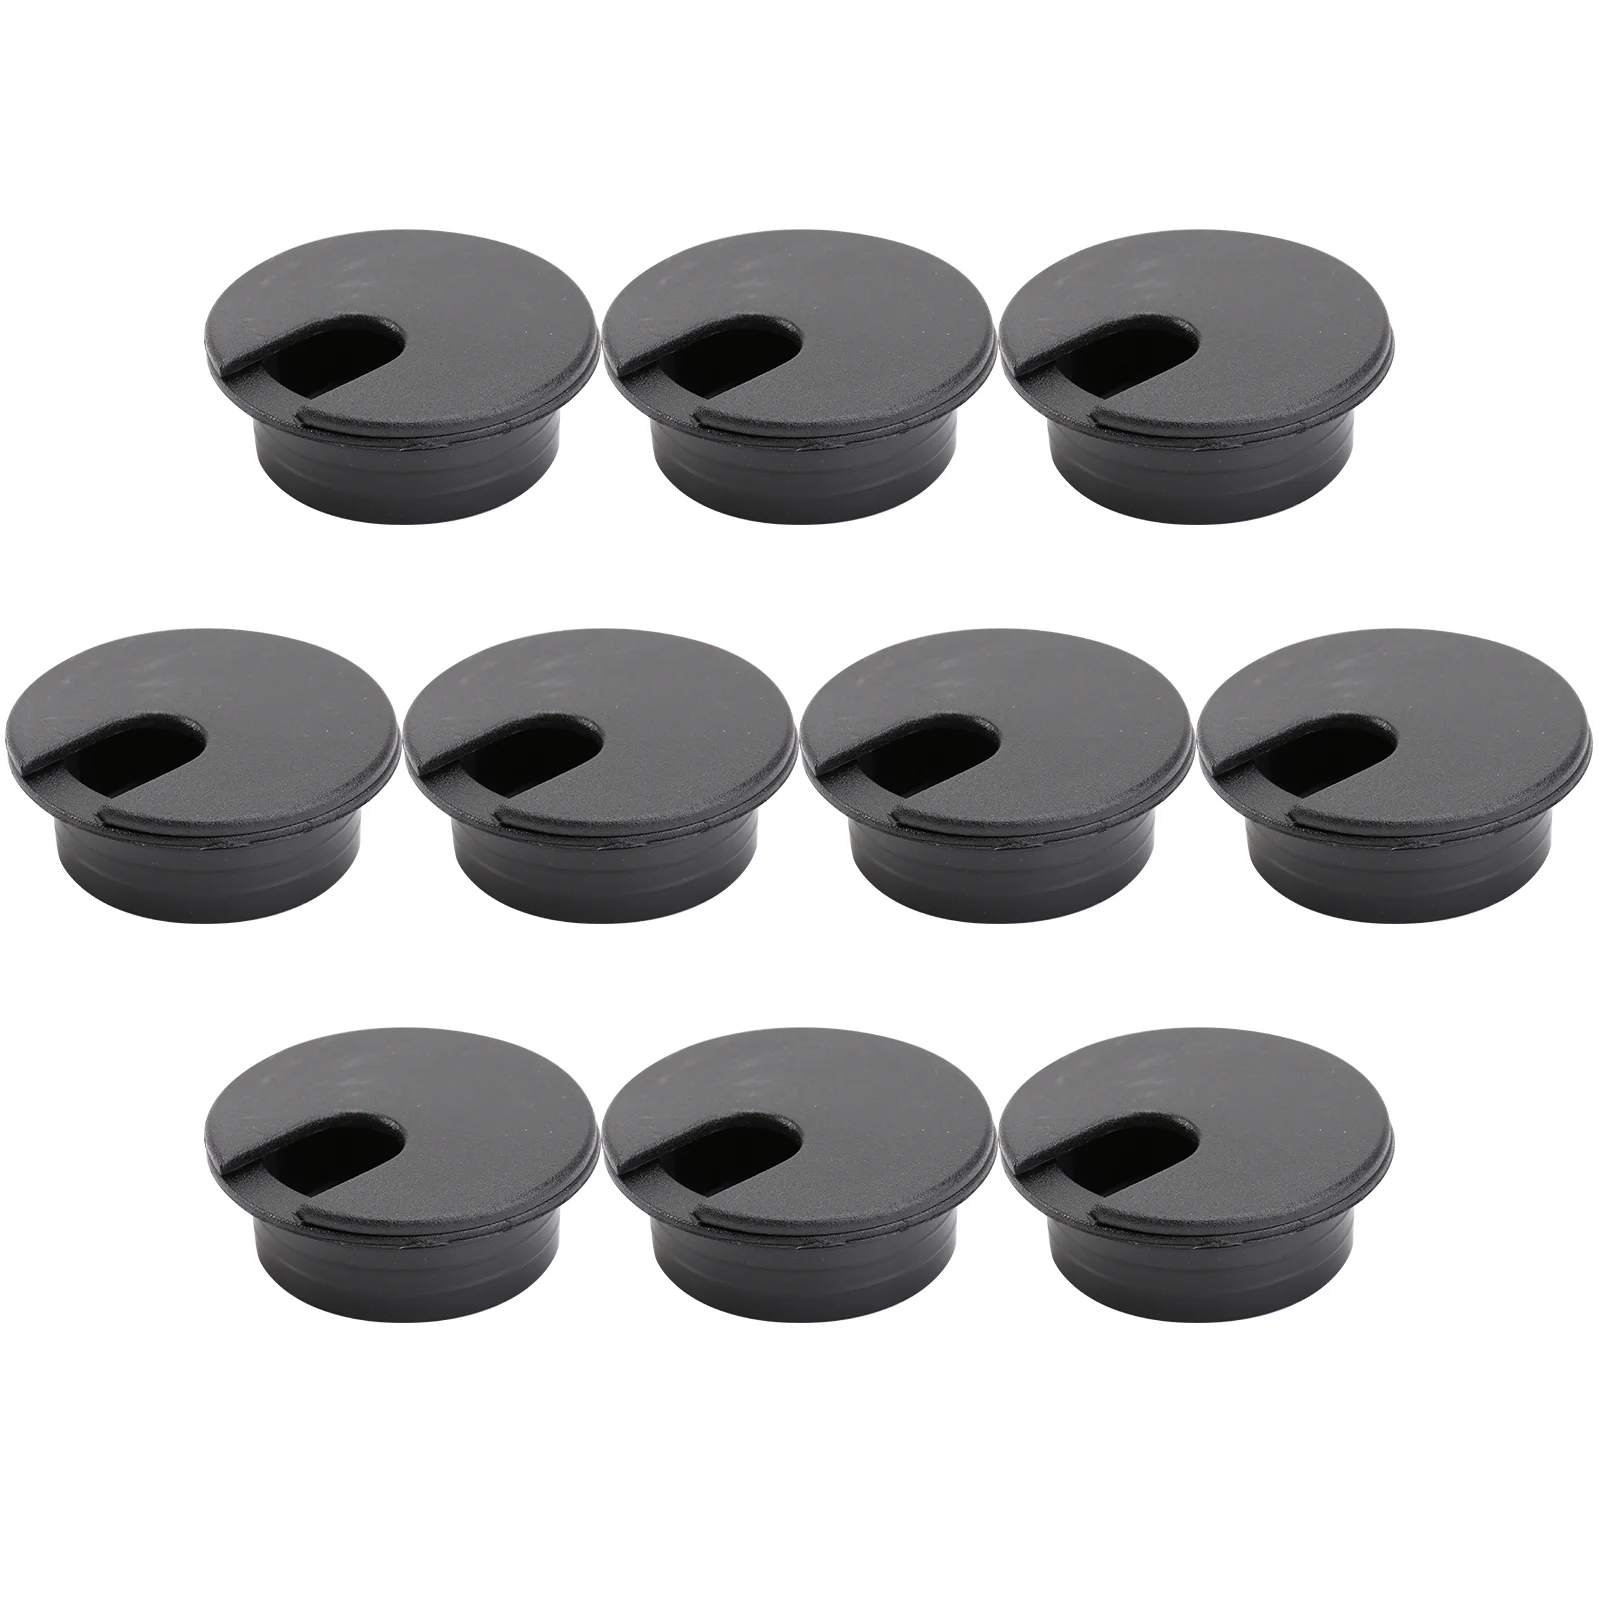 

Cable Cover- Desk Cable Wire Grommet Cord PC Computer Desk Grommet Cord Tidy Cable Hole Cover Organizers for Computer Desktop (